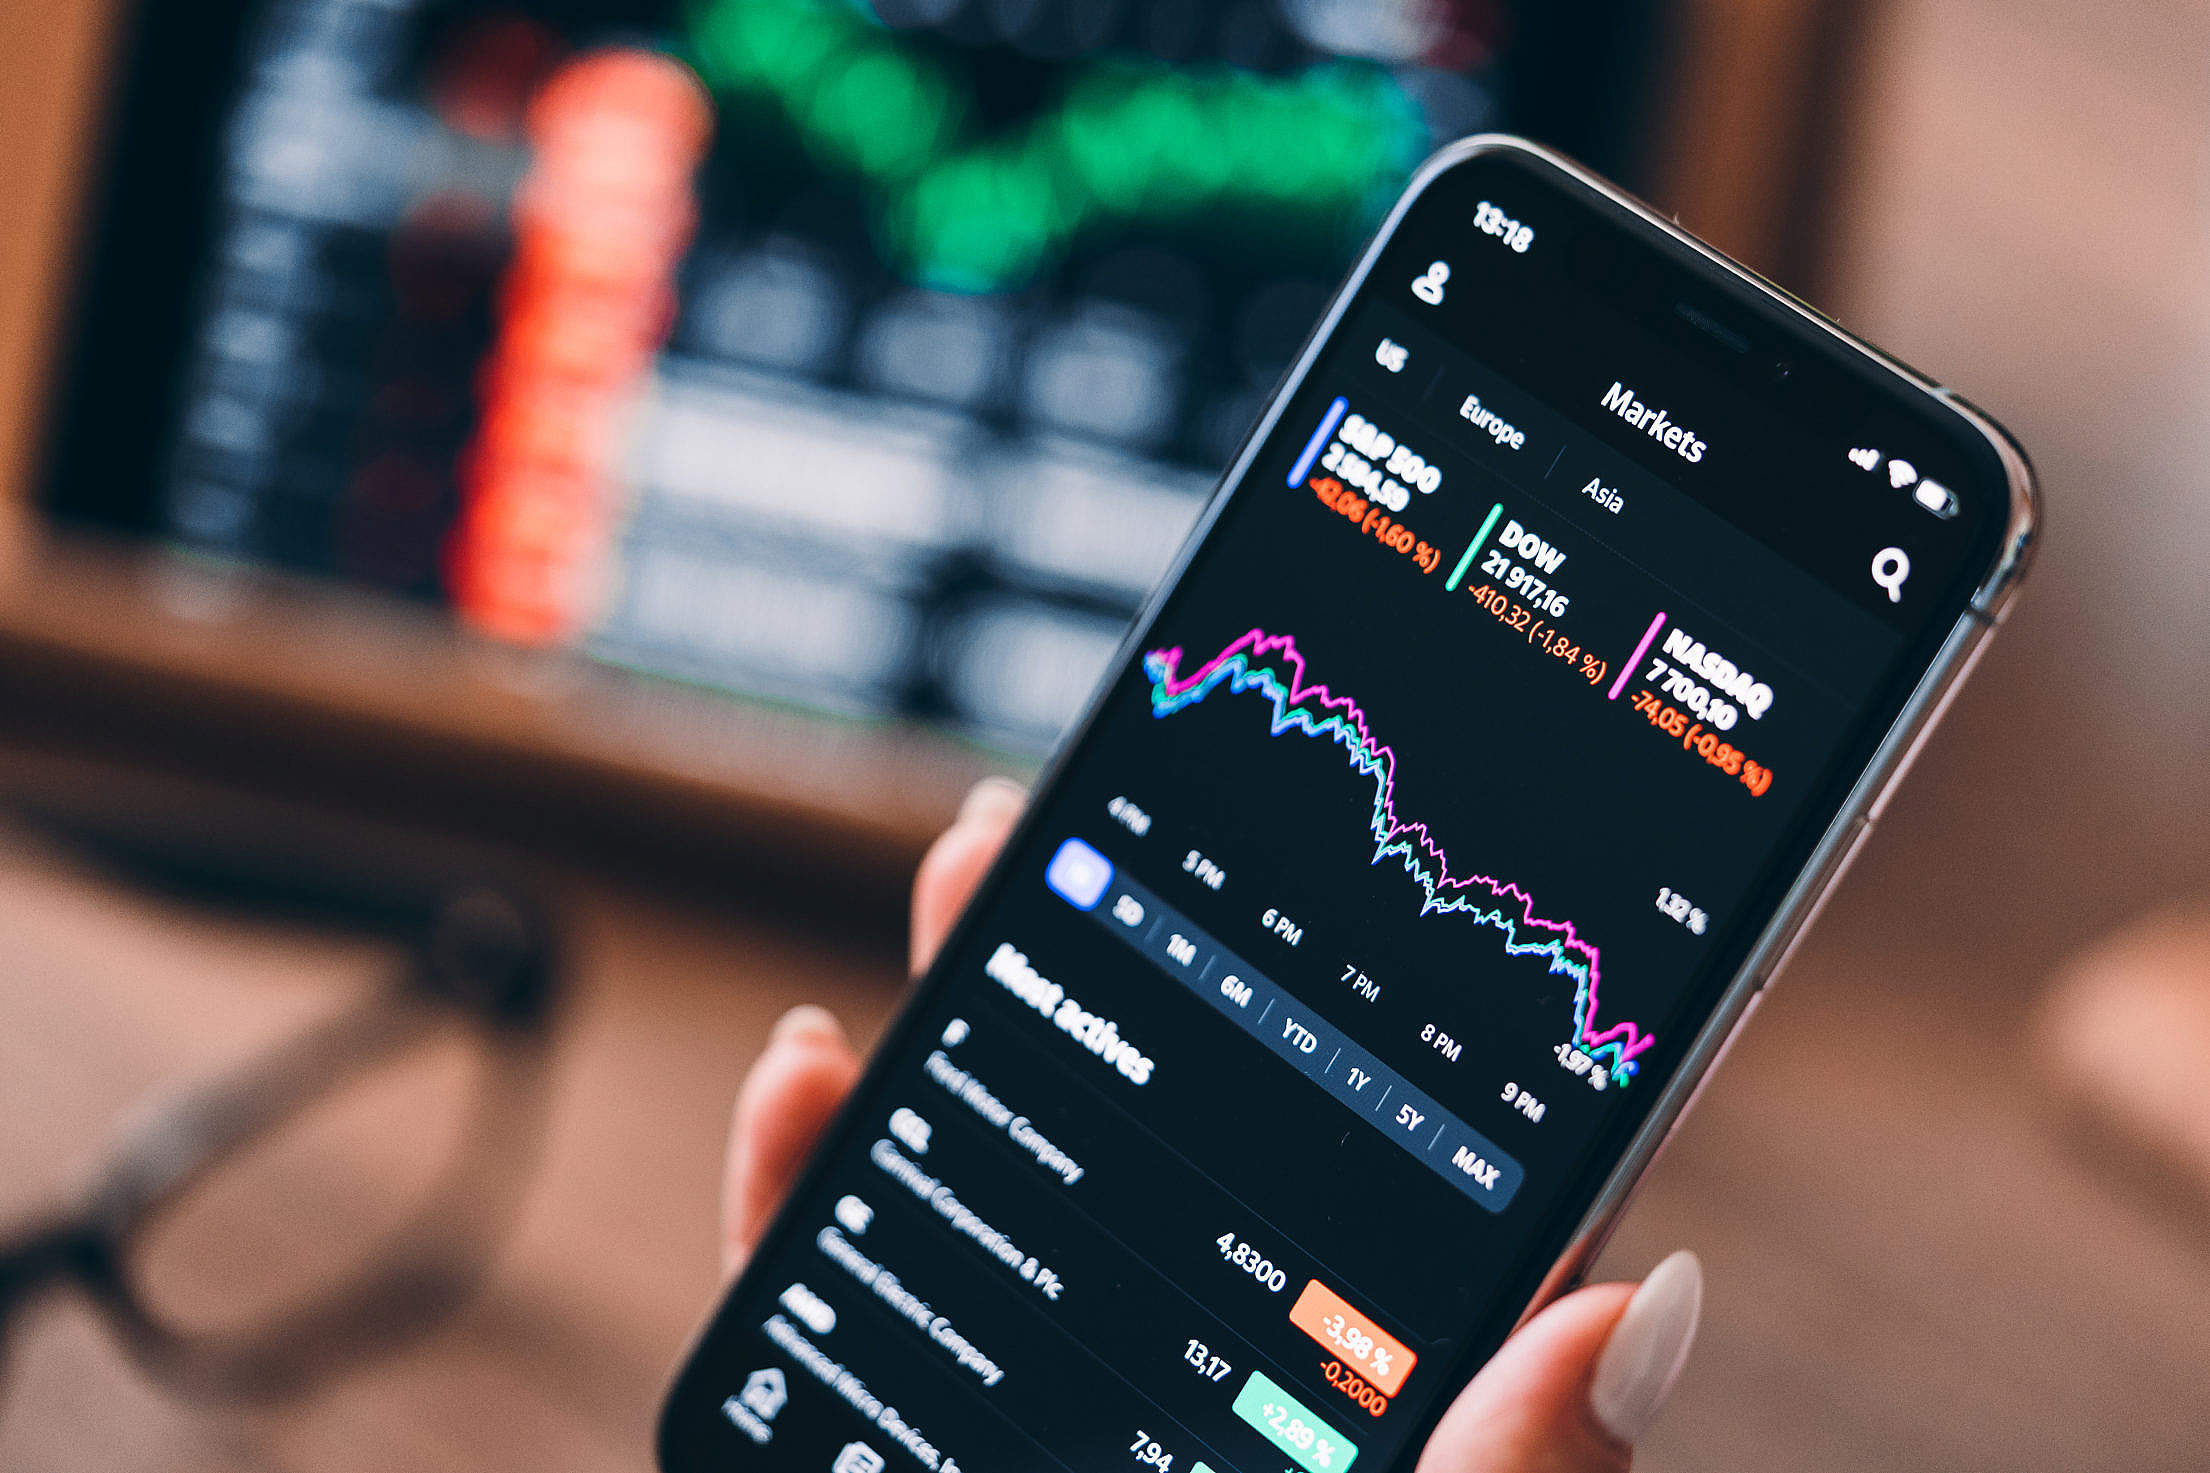 How To Invest In Mutual Funds Through Trading App And Why?